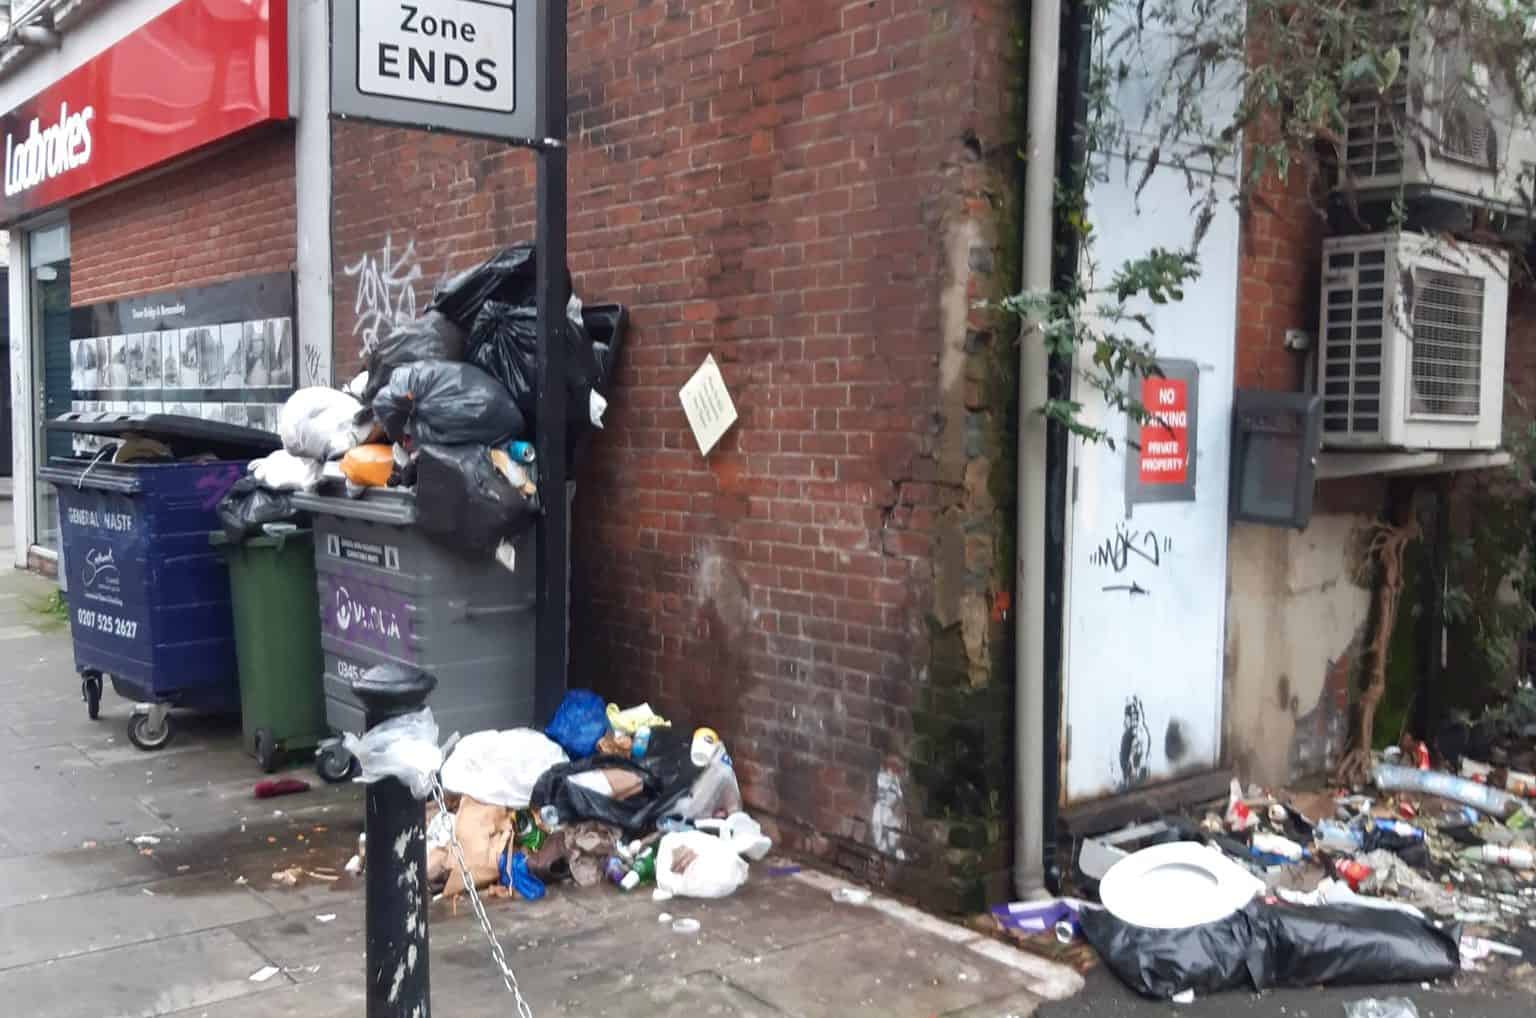 One reader, @ShivMcKenna, shared this image of Tower Bridge Road and Webb Street on Feb 1, describing the litter situation as 'appalling'.